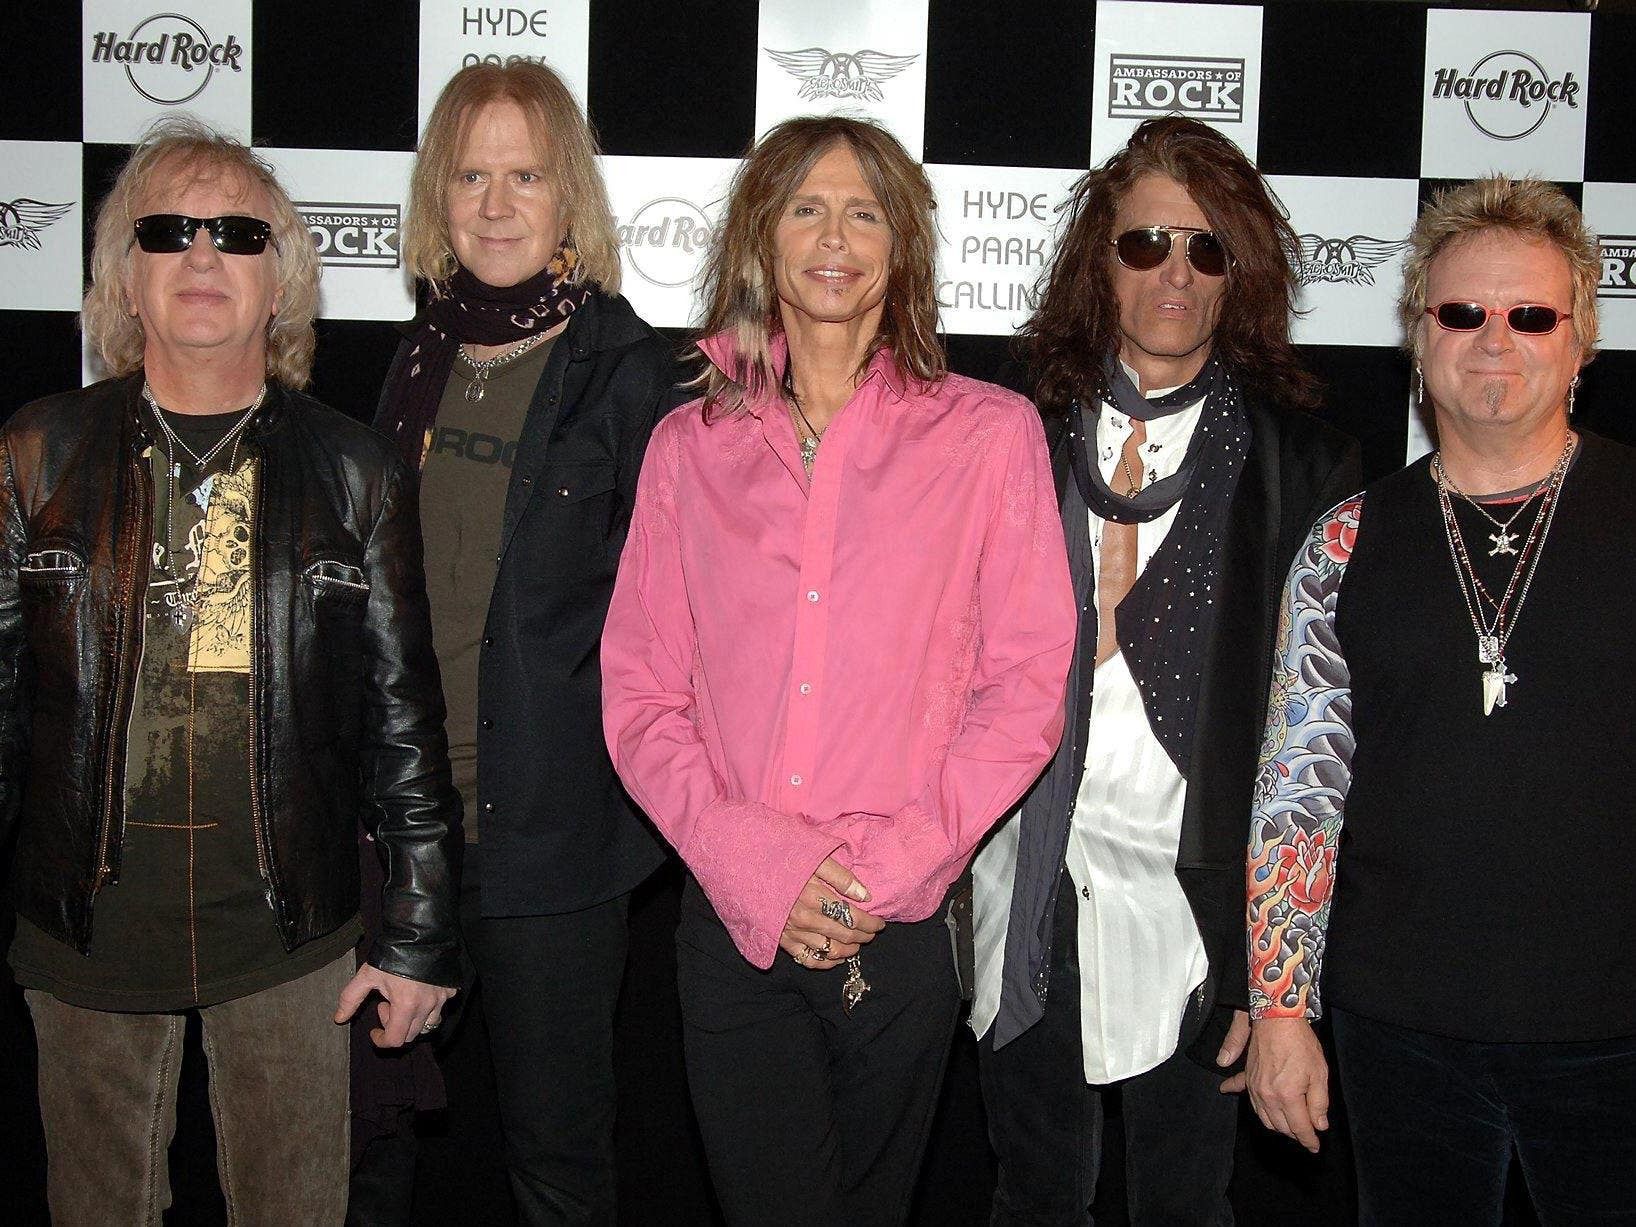 Aerosmith announces retirement from touring after Steven Tyler vocal injury